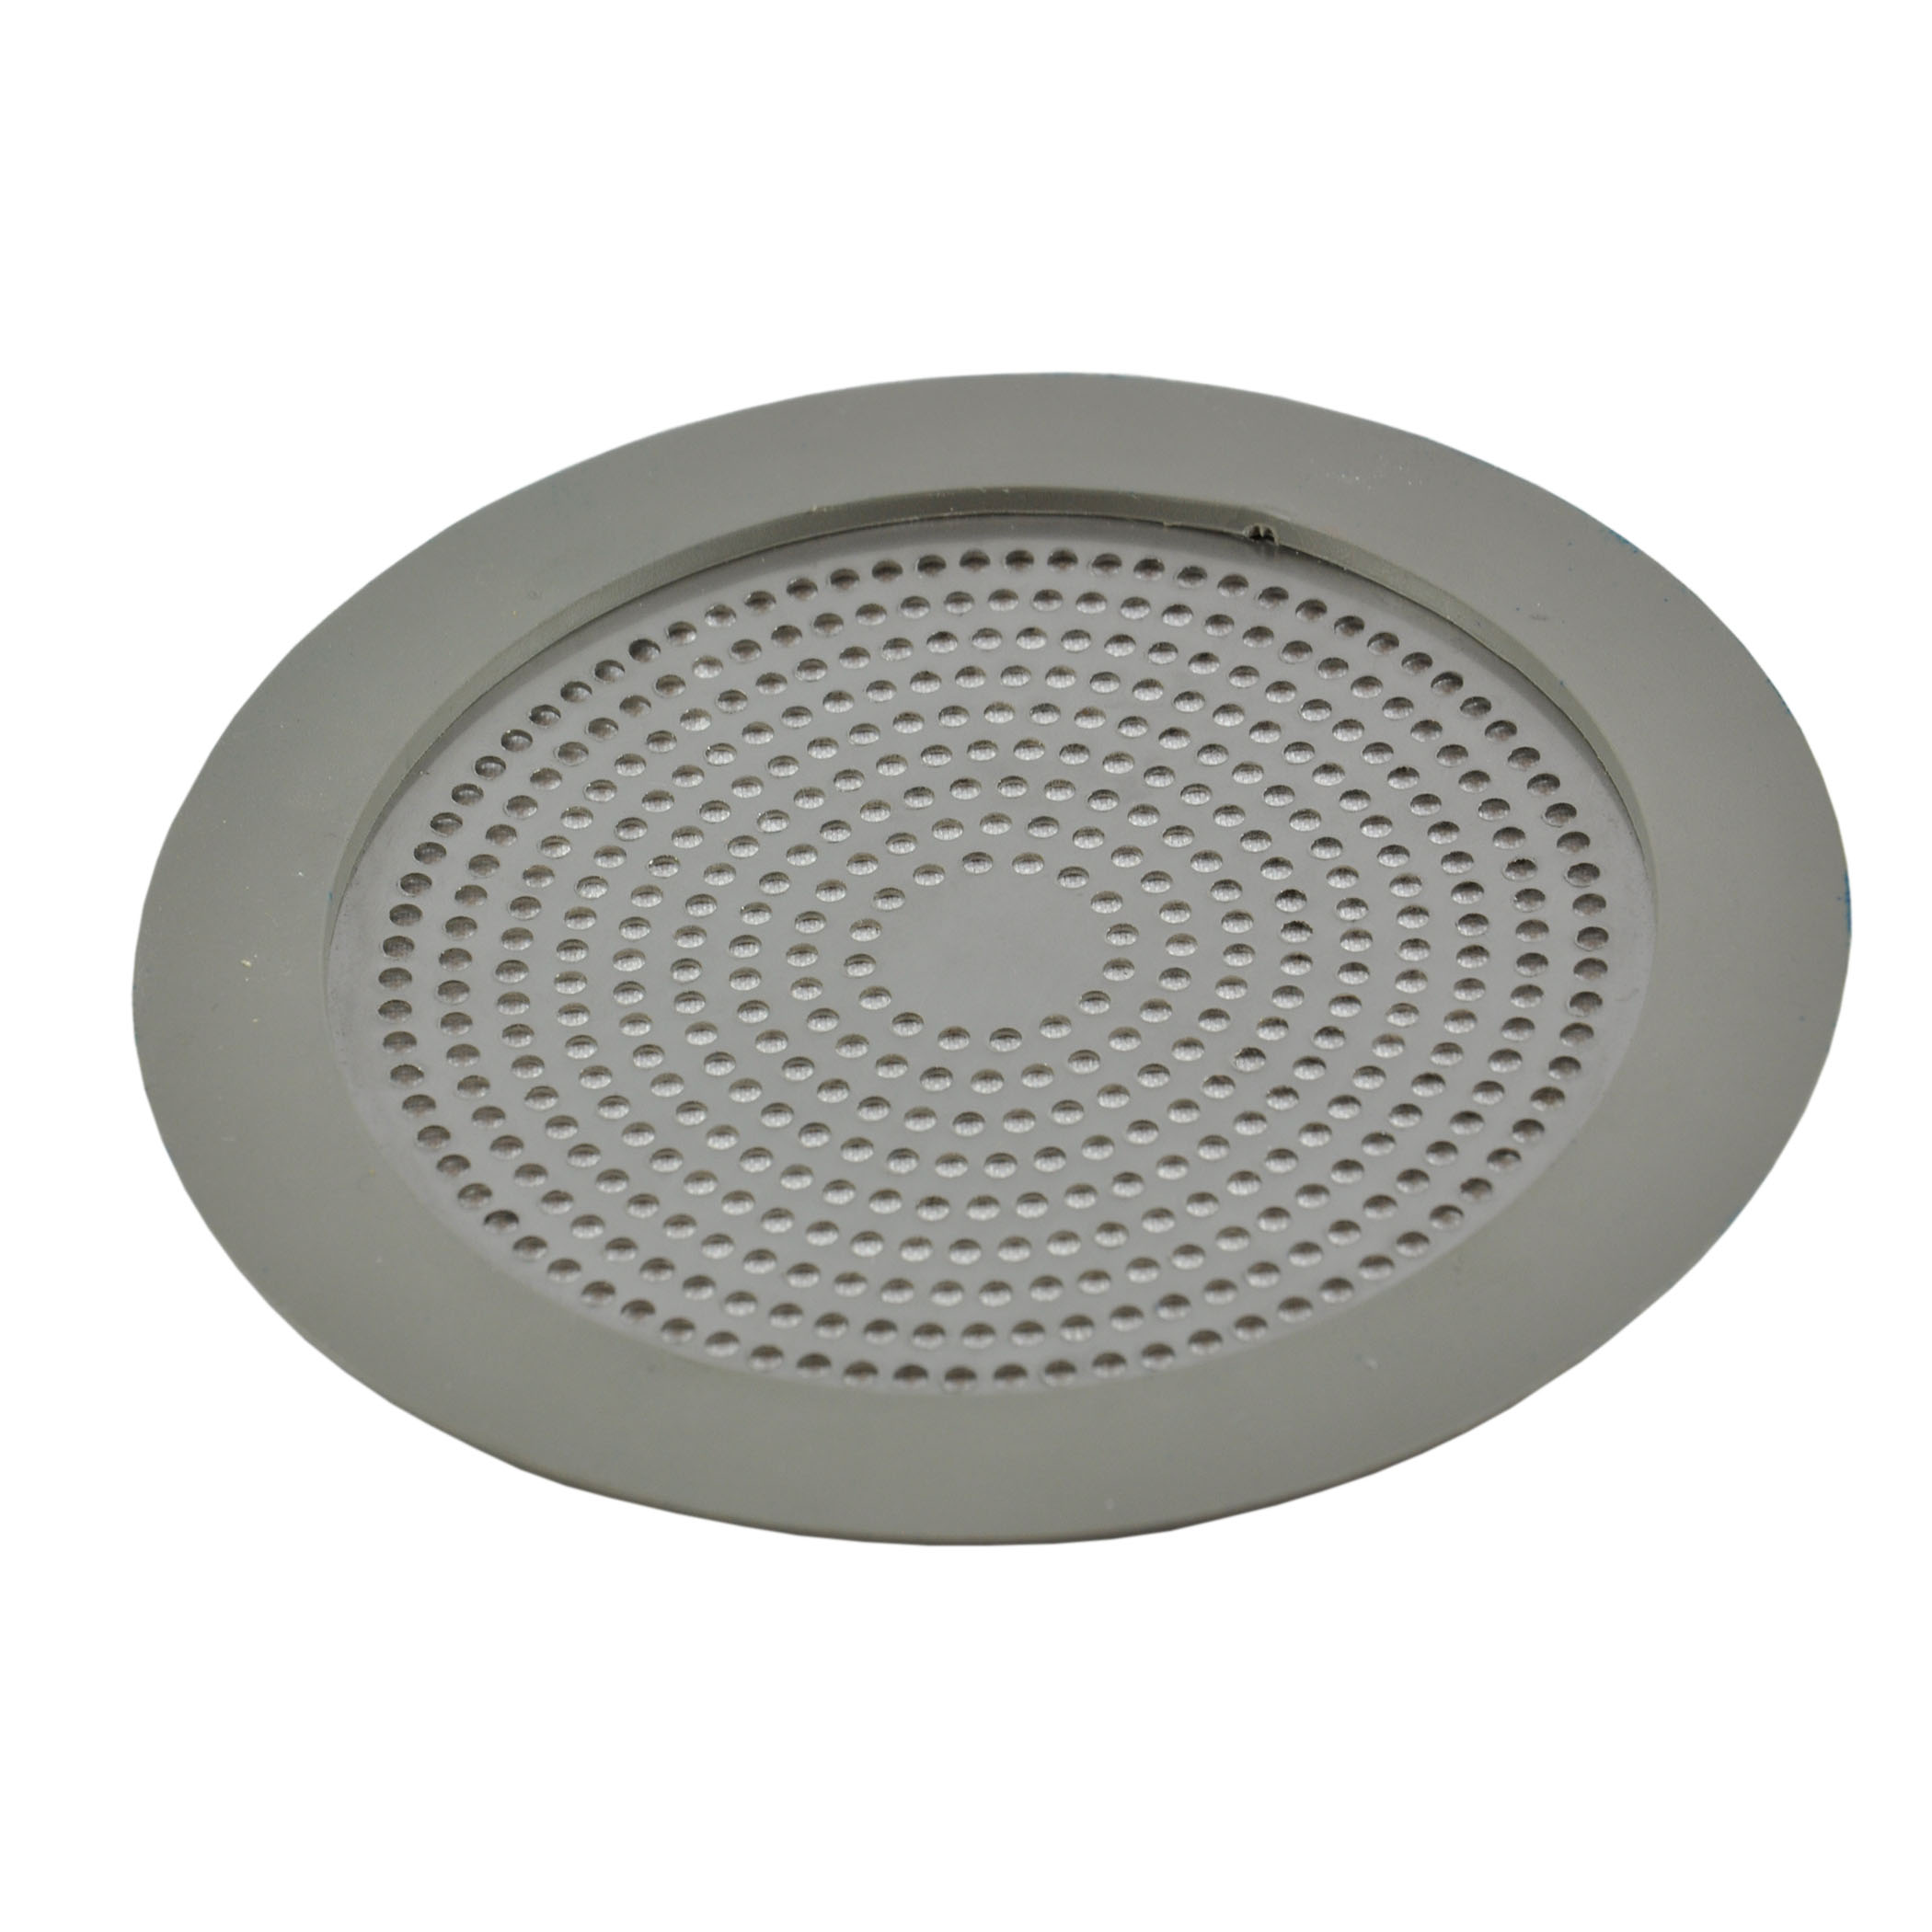 Shower Shroom Ultra Edition Brushed Stainless Steel Drain Protector - Total  Qty: 1, Count of: 1 - Harris Teeter